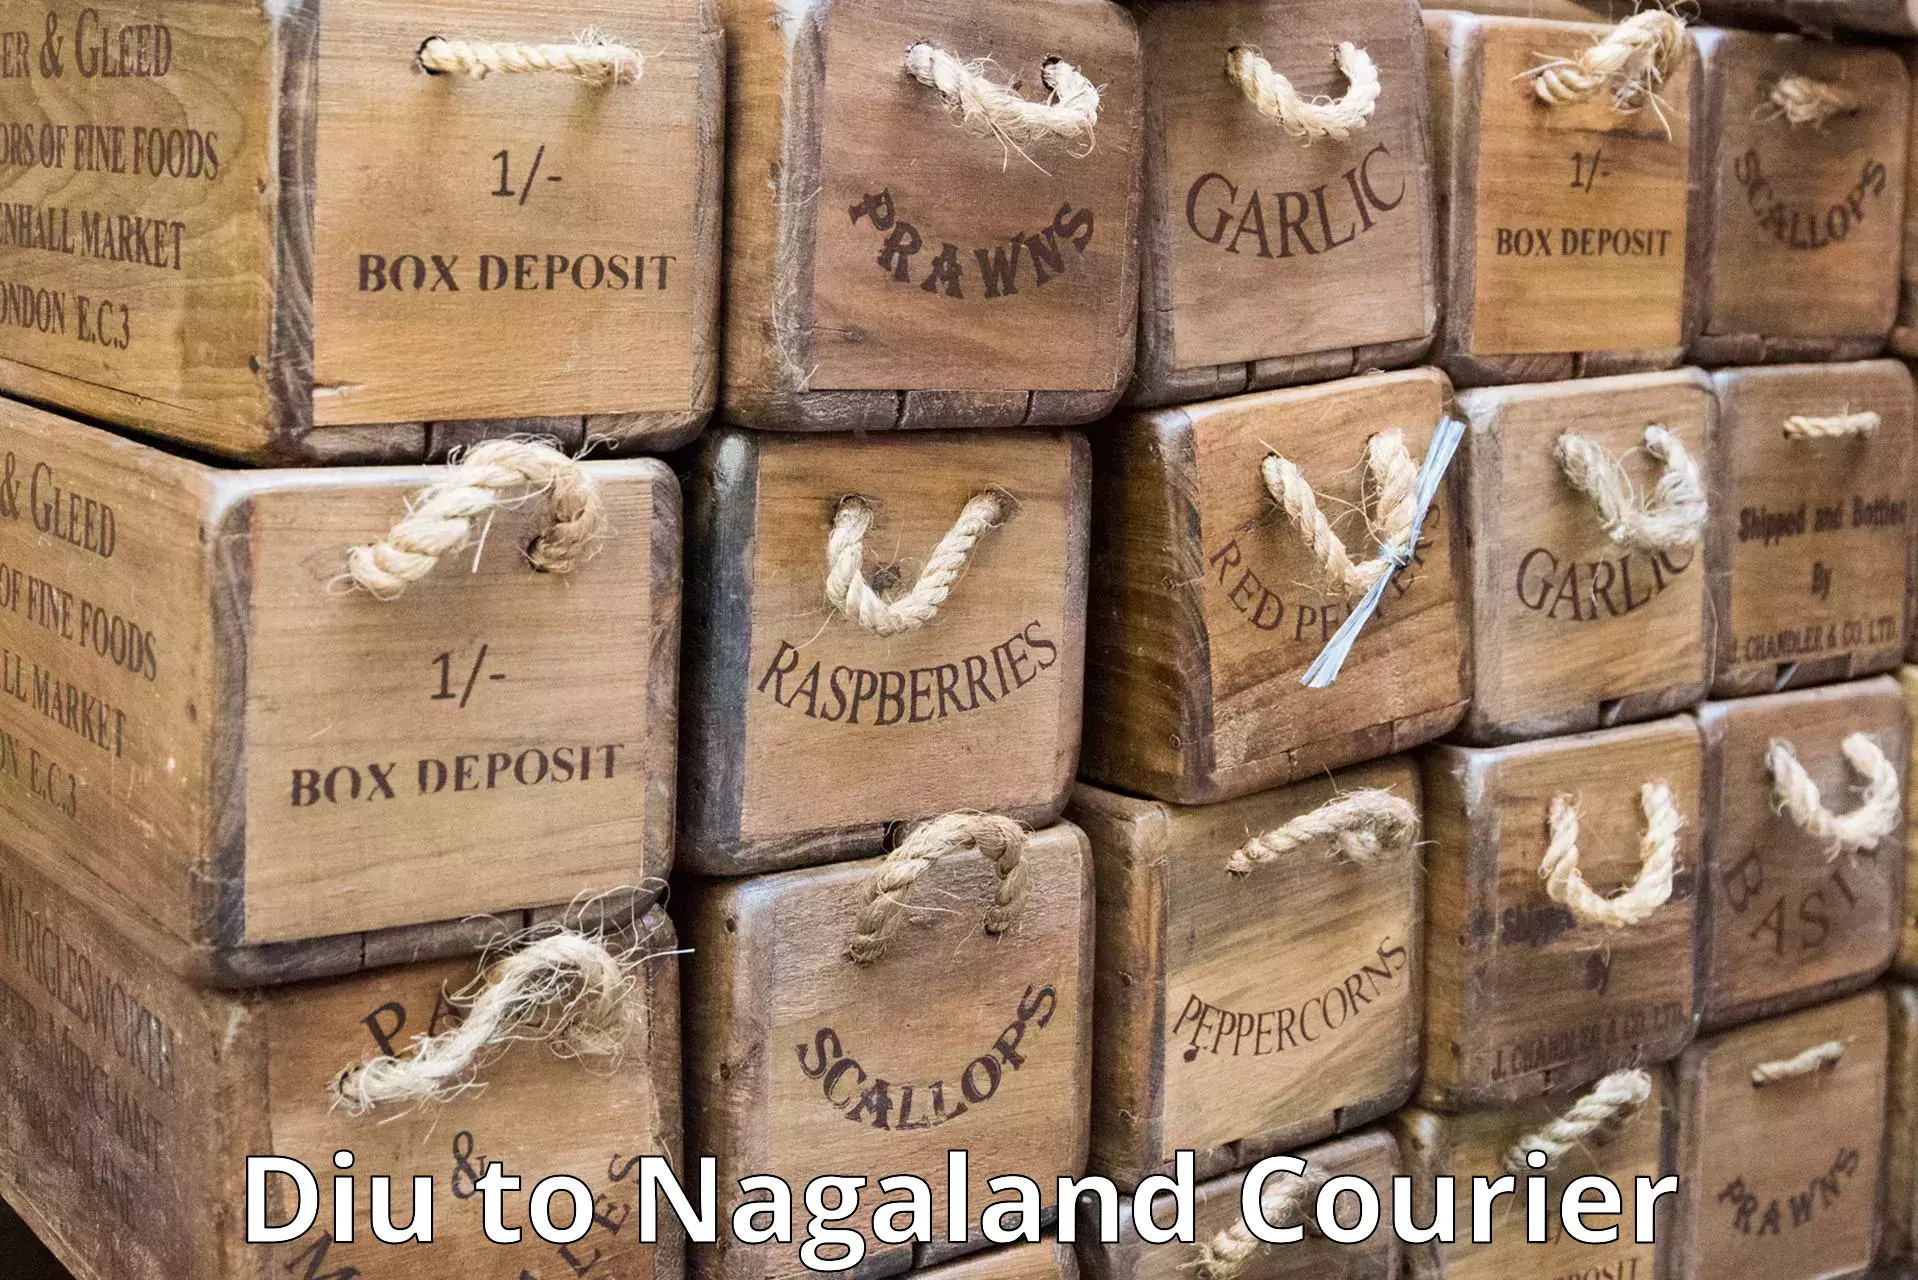 Package delivery network Diu to Nagaland